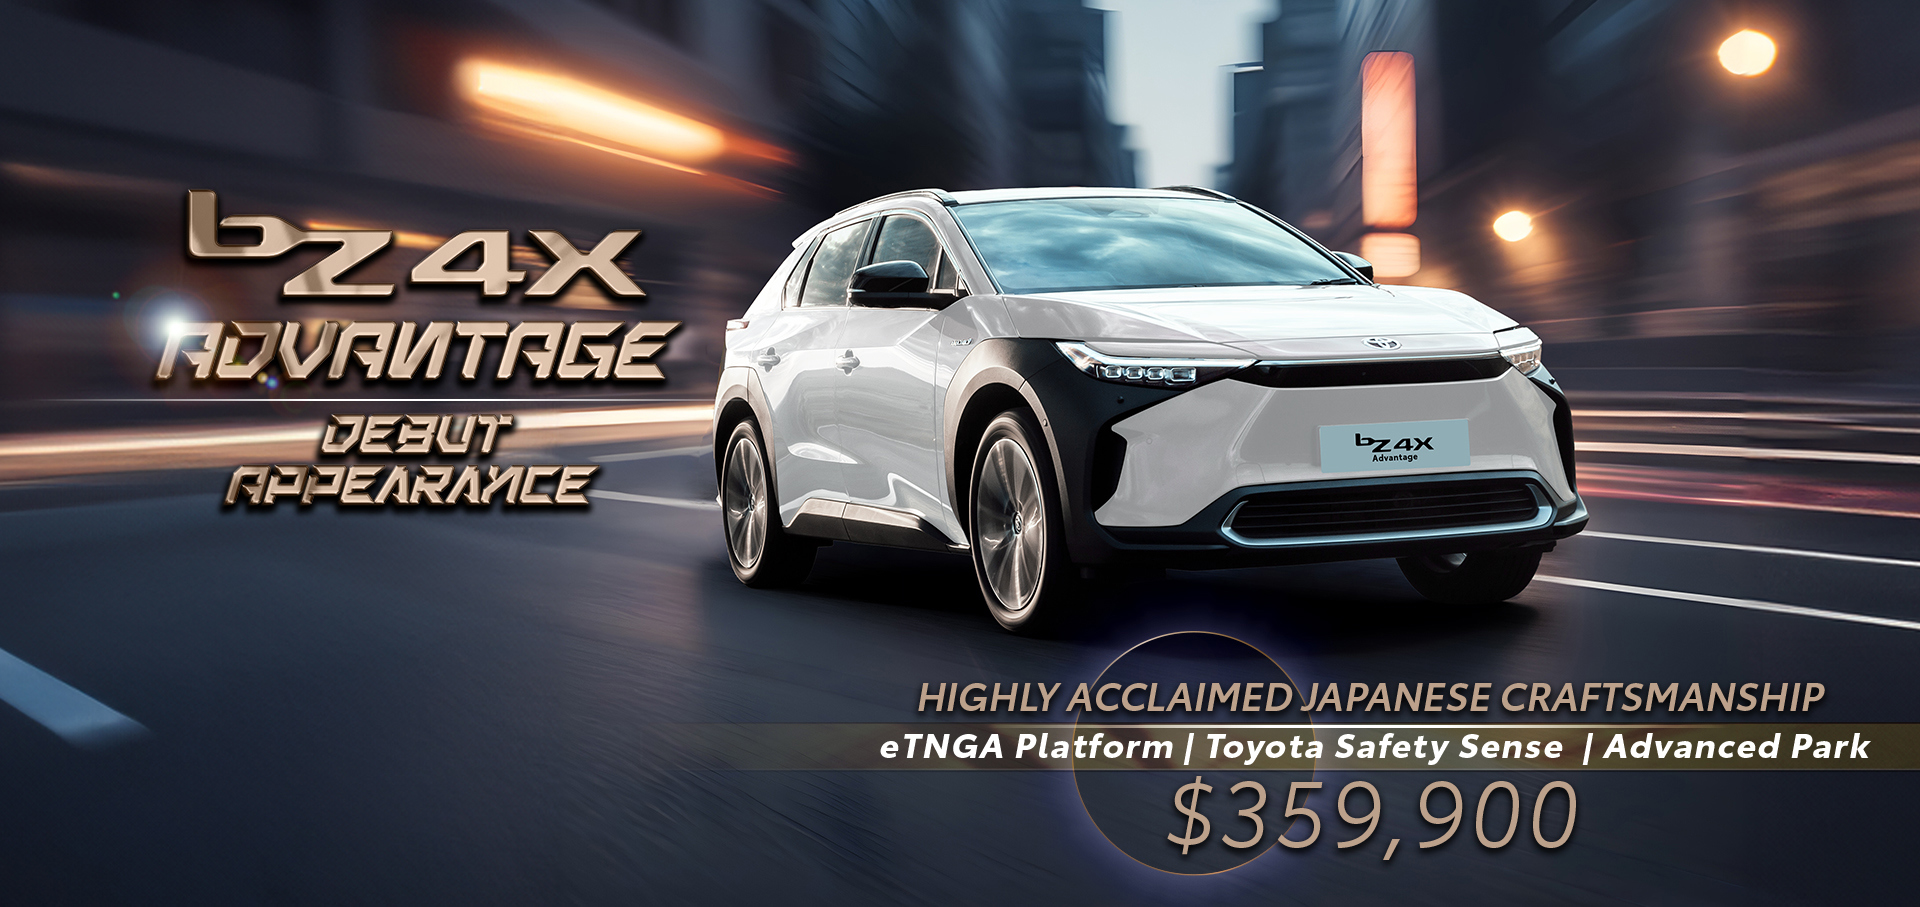 INTRODUCING THE-NEW ELECTRIC bZ4X ADVANTAGE🔸Japanese-Style Electric Experience That Exceeds Expectations